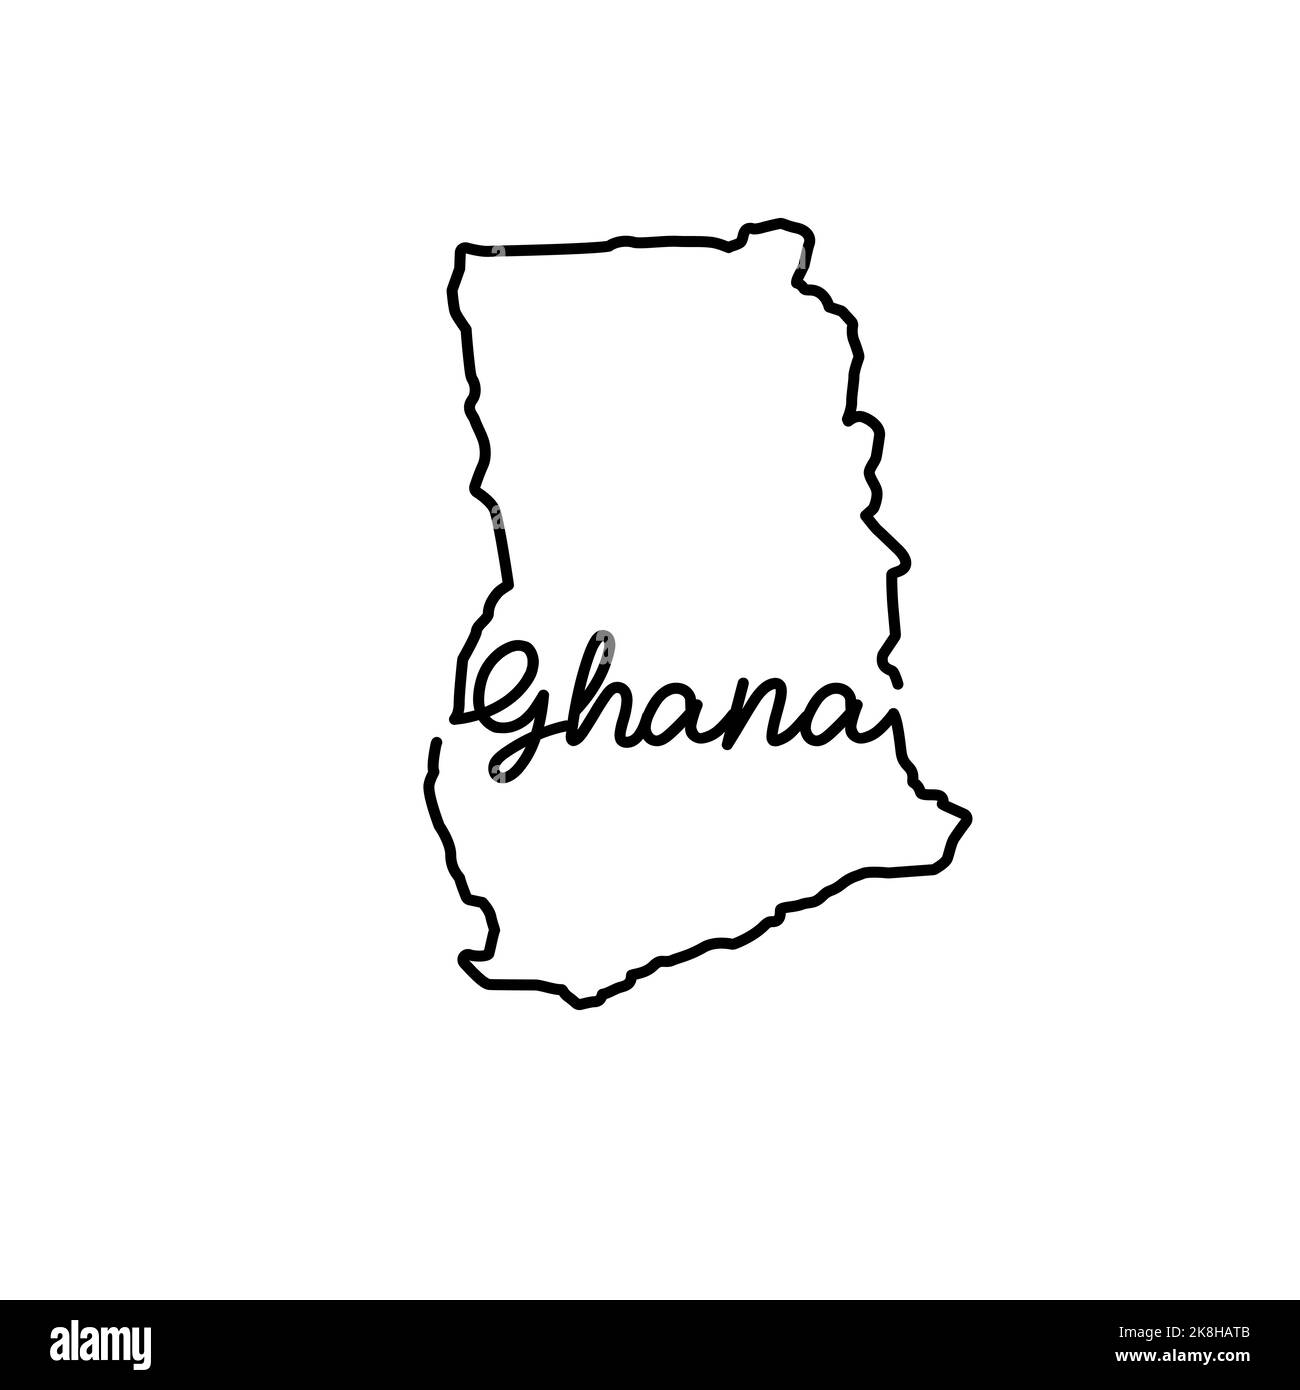 Ghana outline map with the handwritten country name. Continuous line drawing of patriotic home sign. A love for a small homeland. T-shirt print idea. Stock Photo